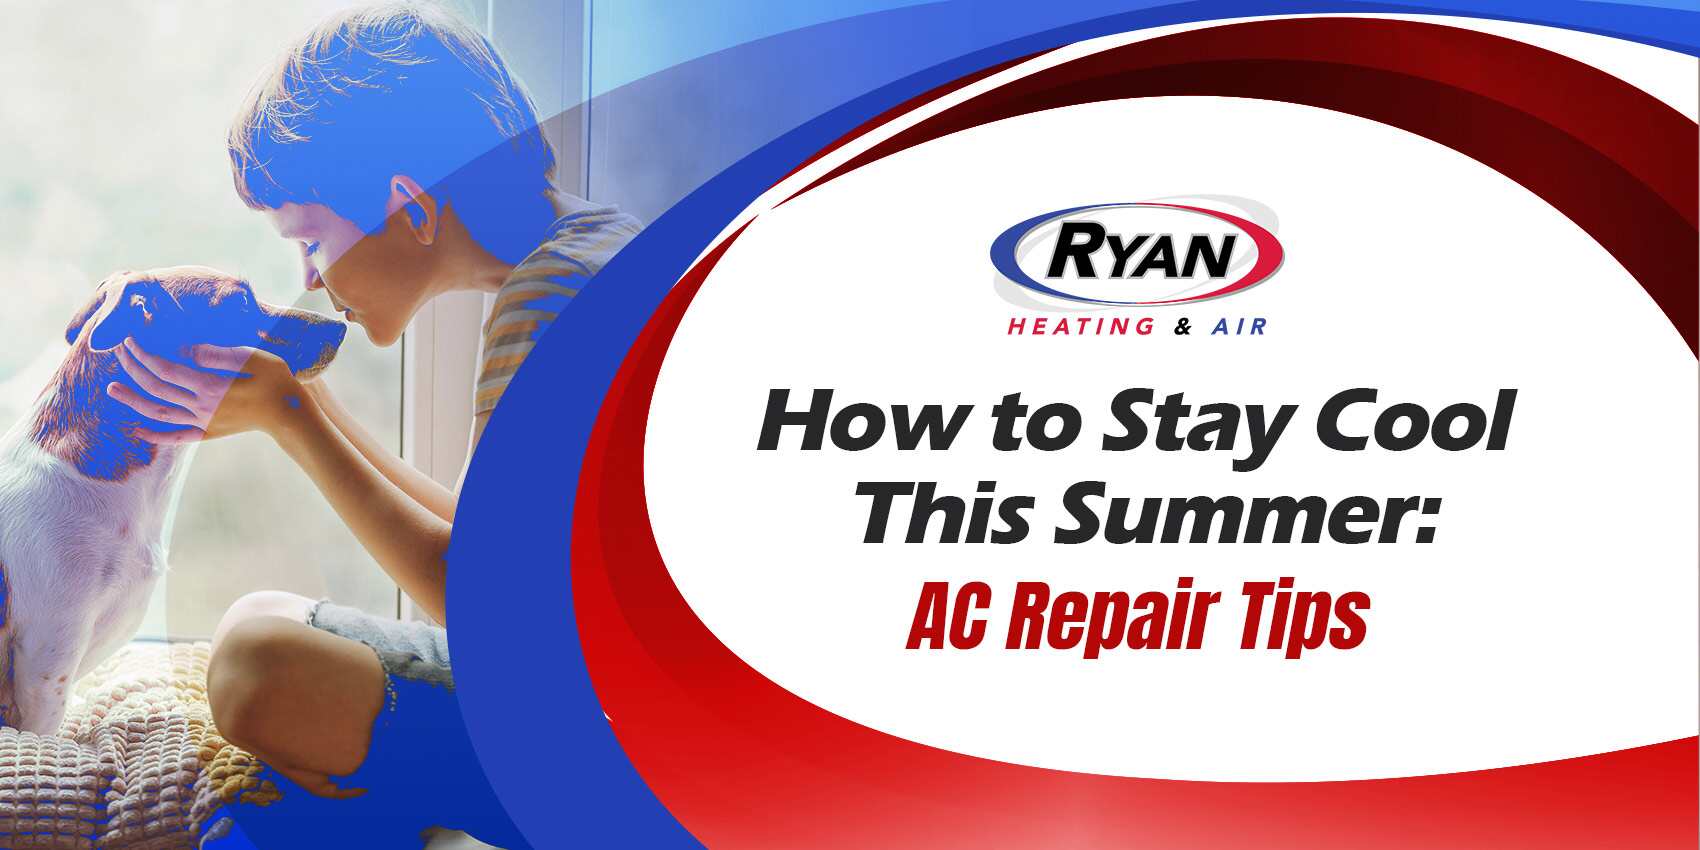 How to Stay Cool This Summer: AC Repair Tips with a child kissing the dog photo